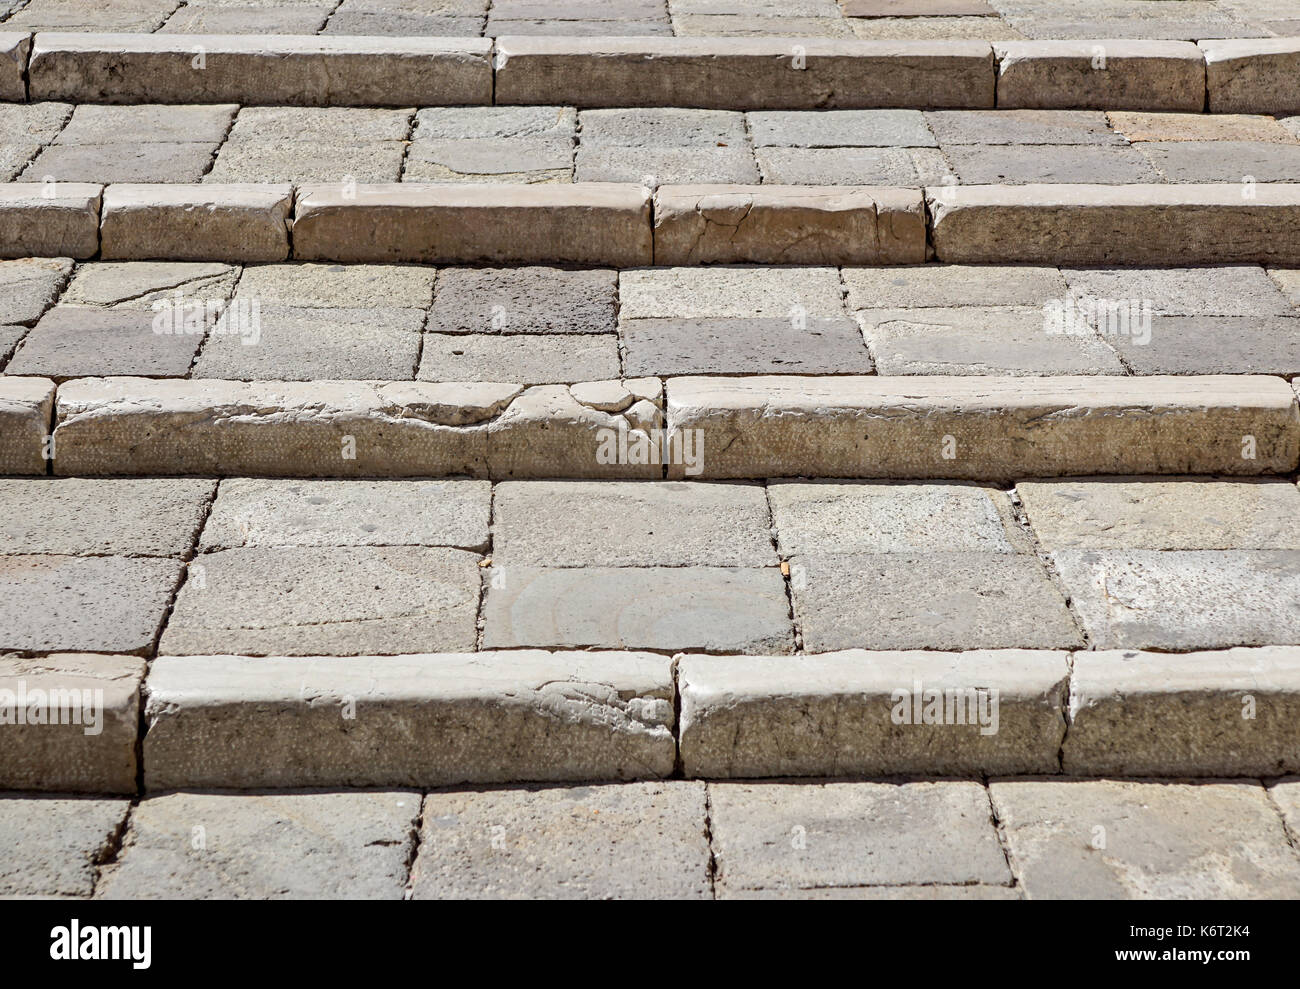 Rocky gray stone escaliers texture pattern perspective Banque D'Images